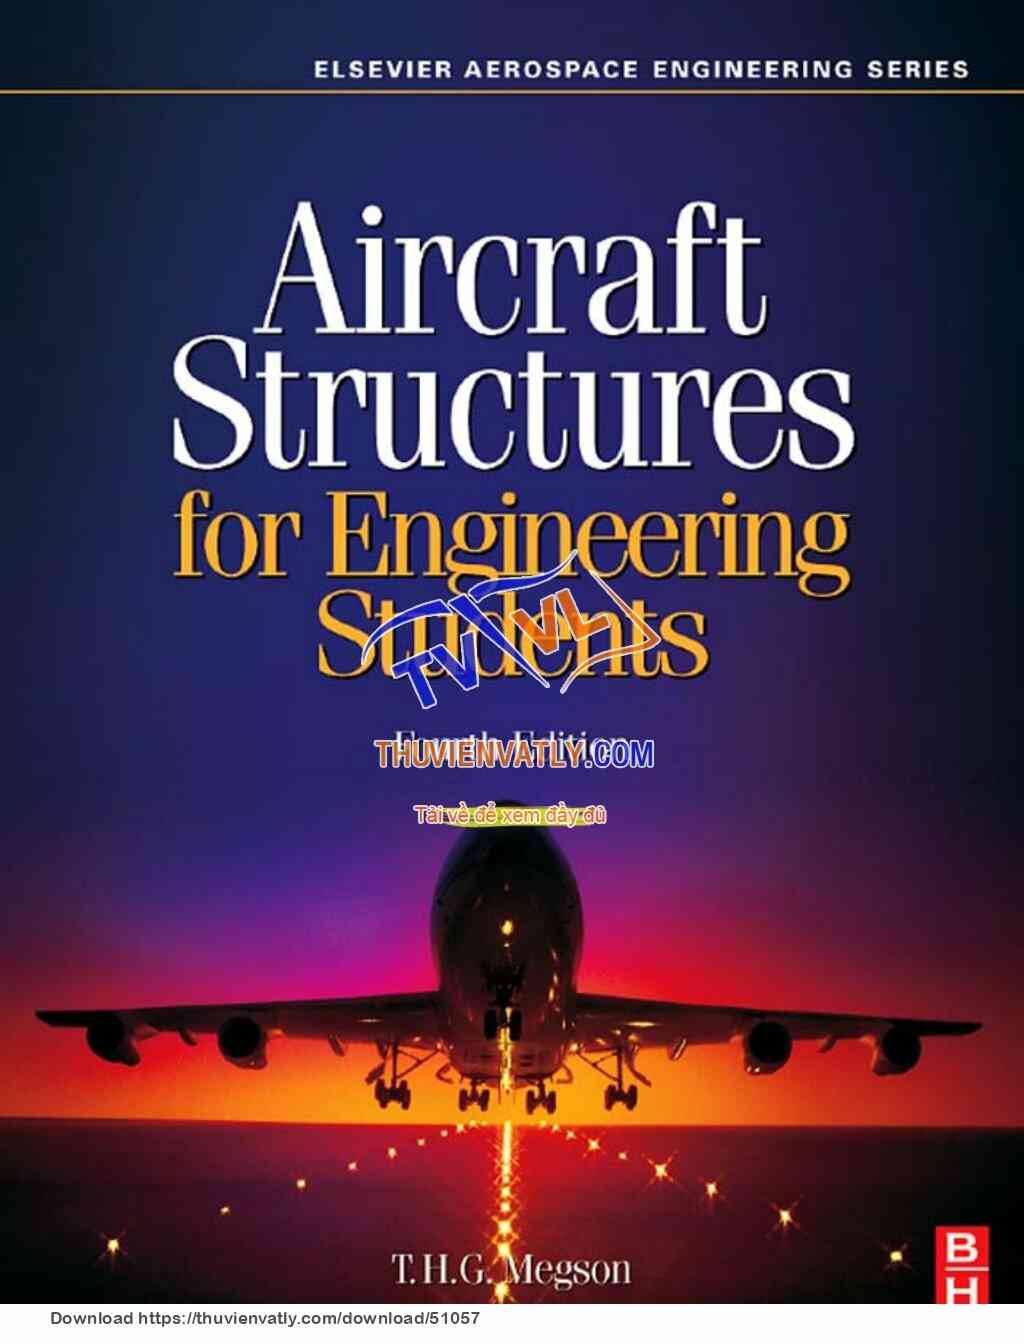 Aircraft structure